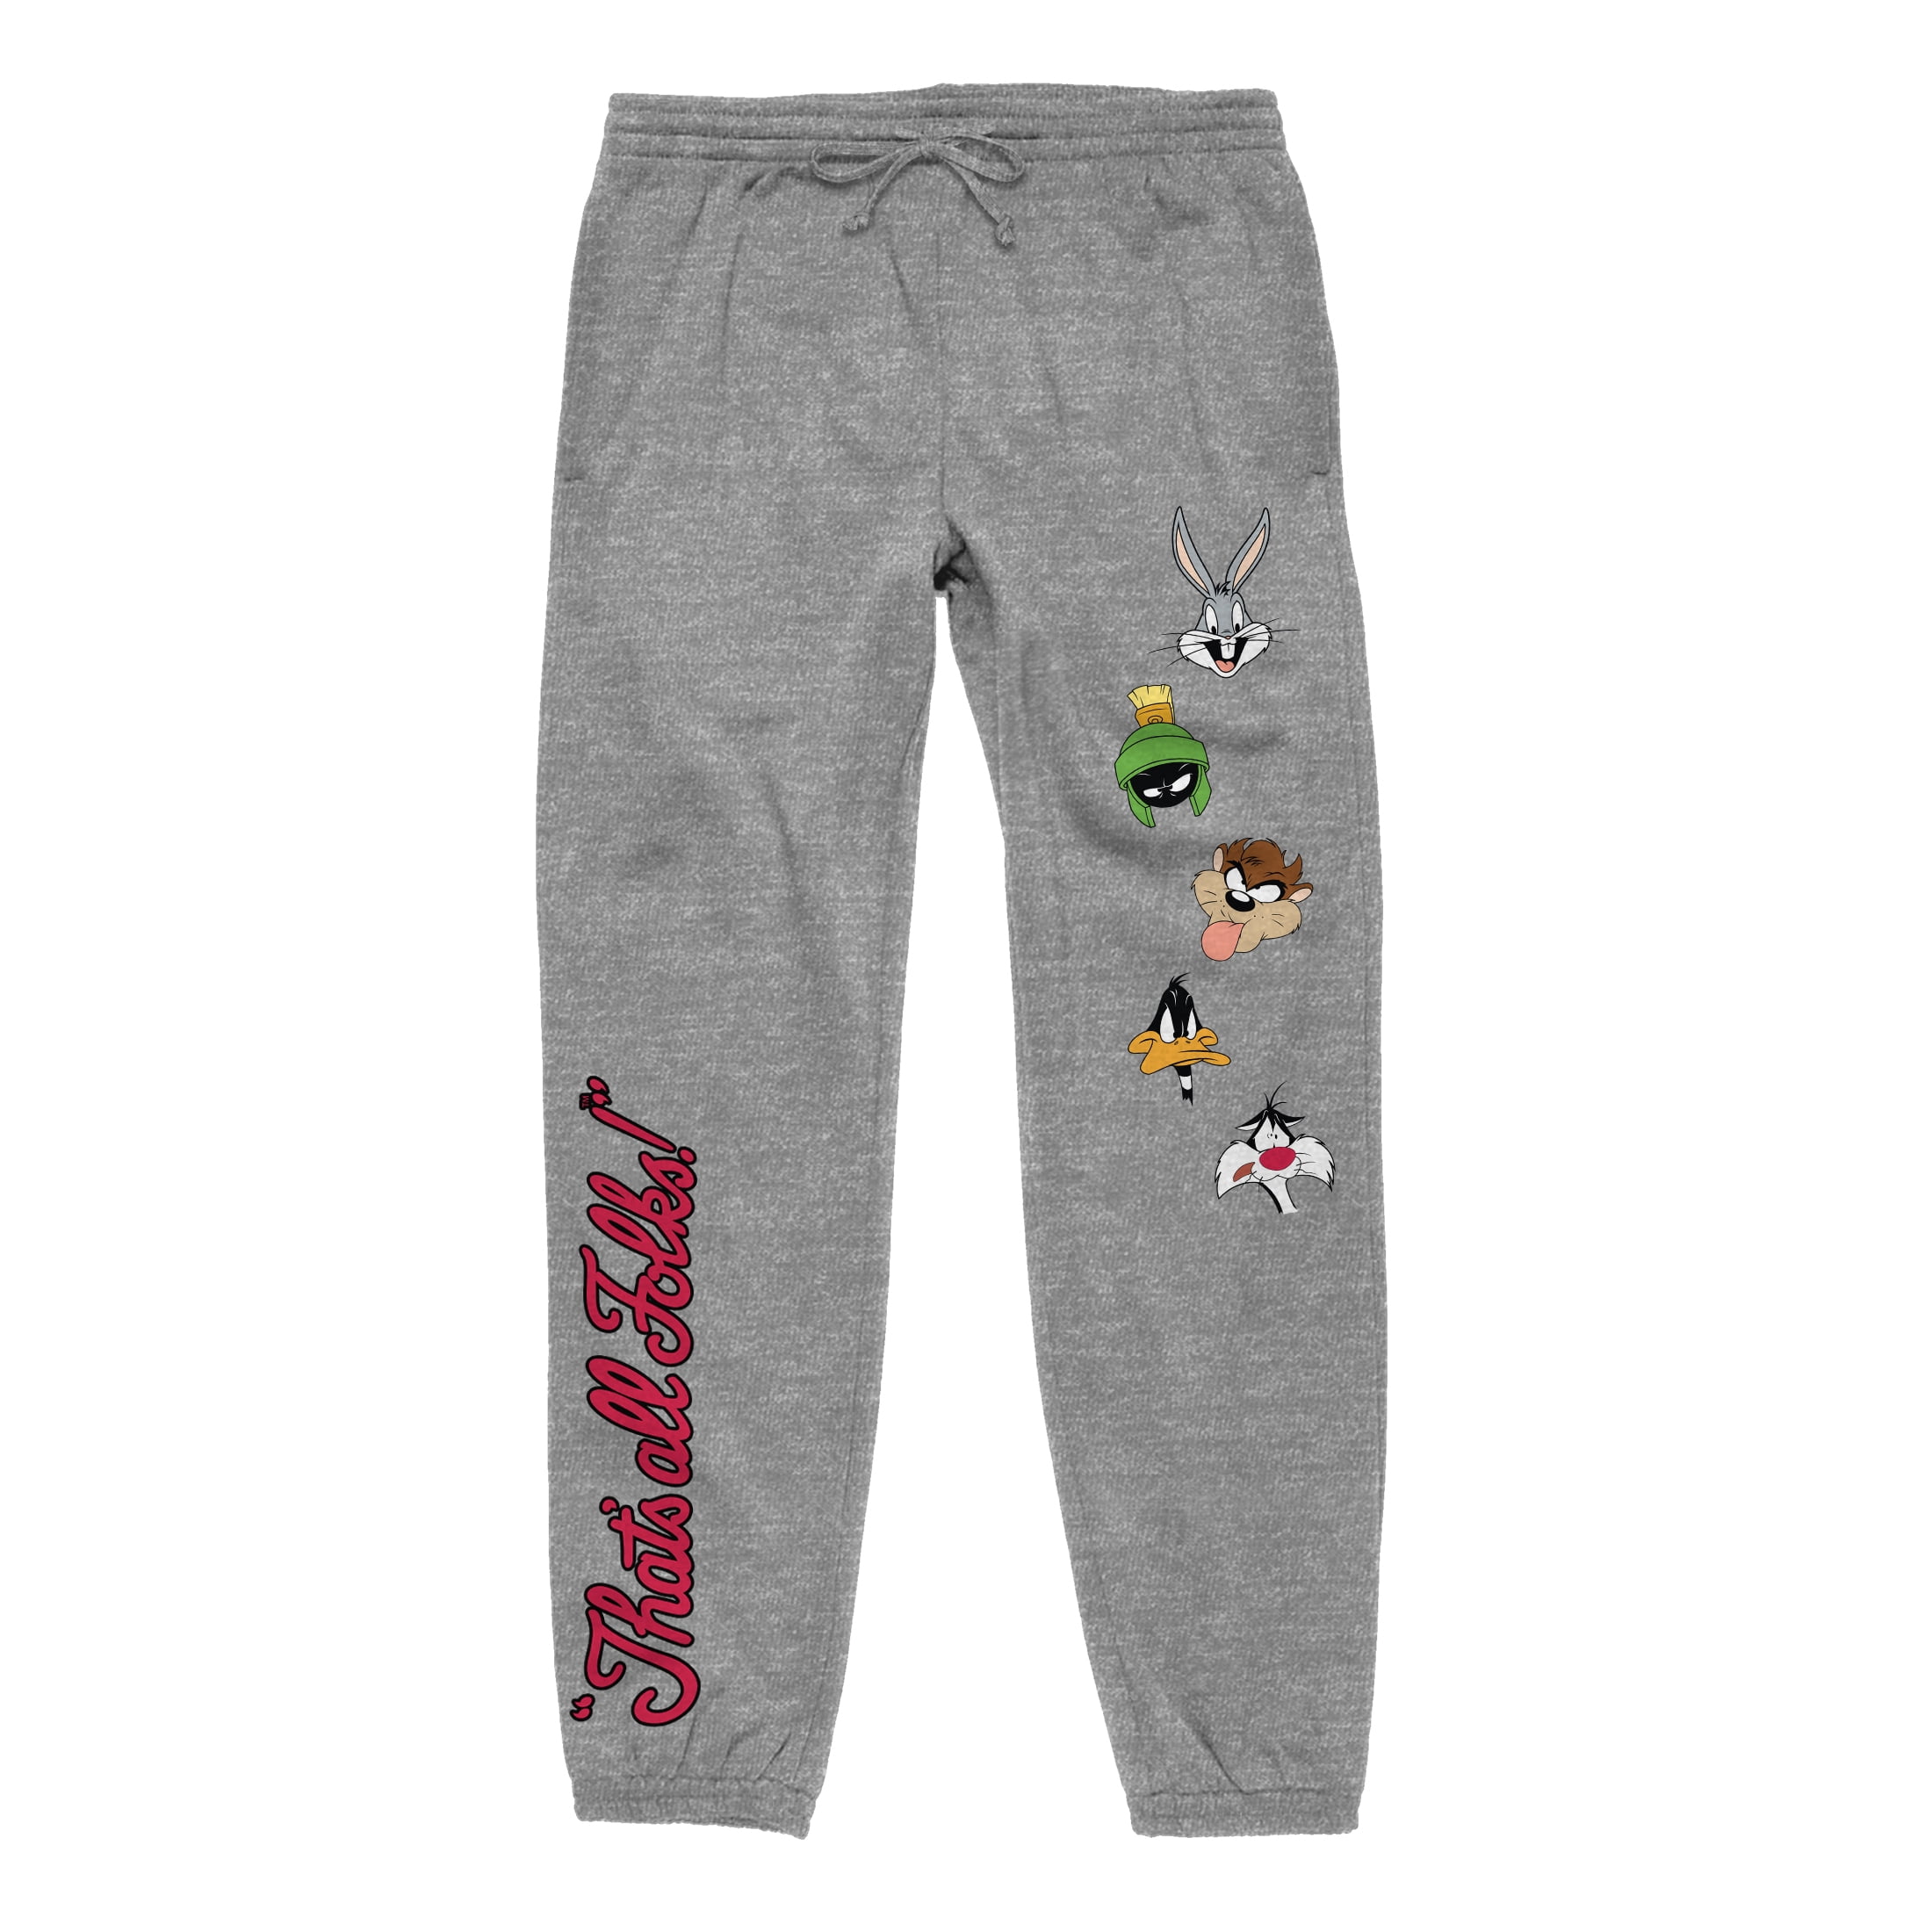 Looney Tunes That's All Folks! Adult Heather Grey Graphic Sweatpants- M